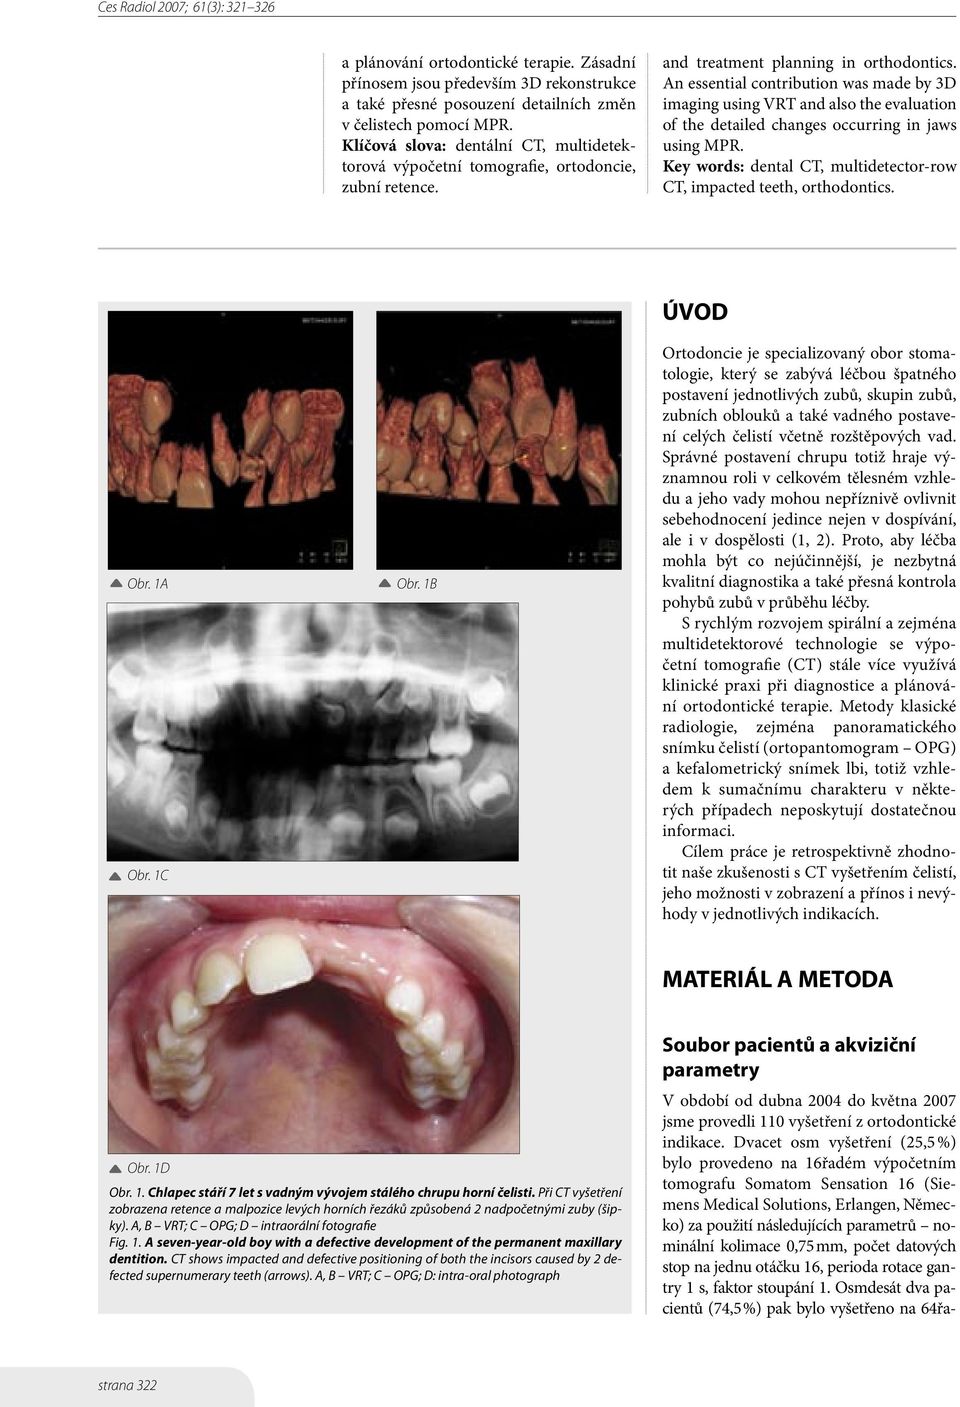 An essential contribution was made by 3D imaging using VRT and also the evaluation of the detailed changes occurring in jaws using MPR.